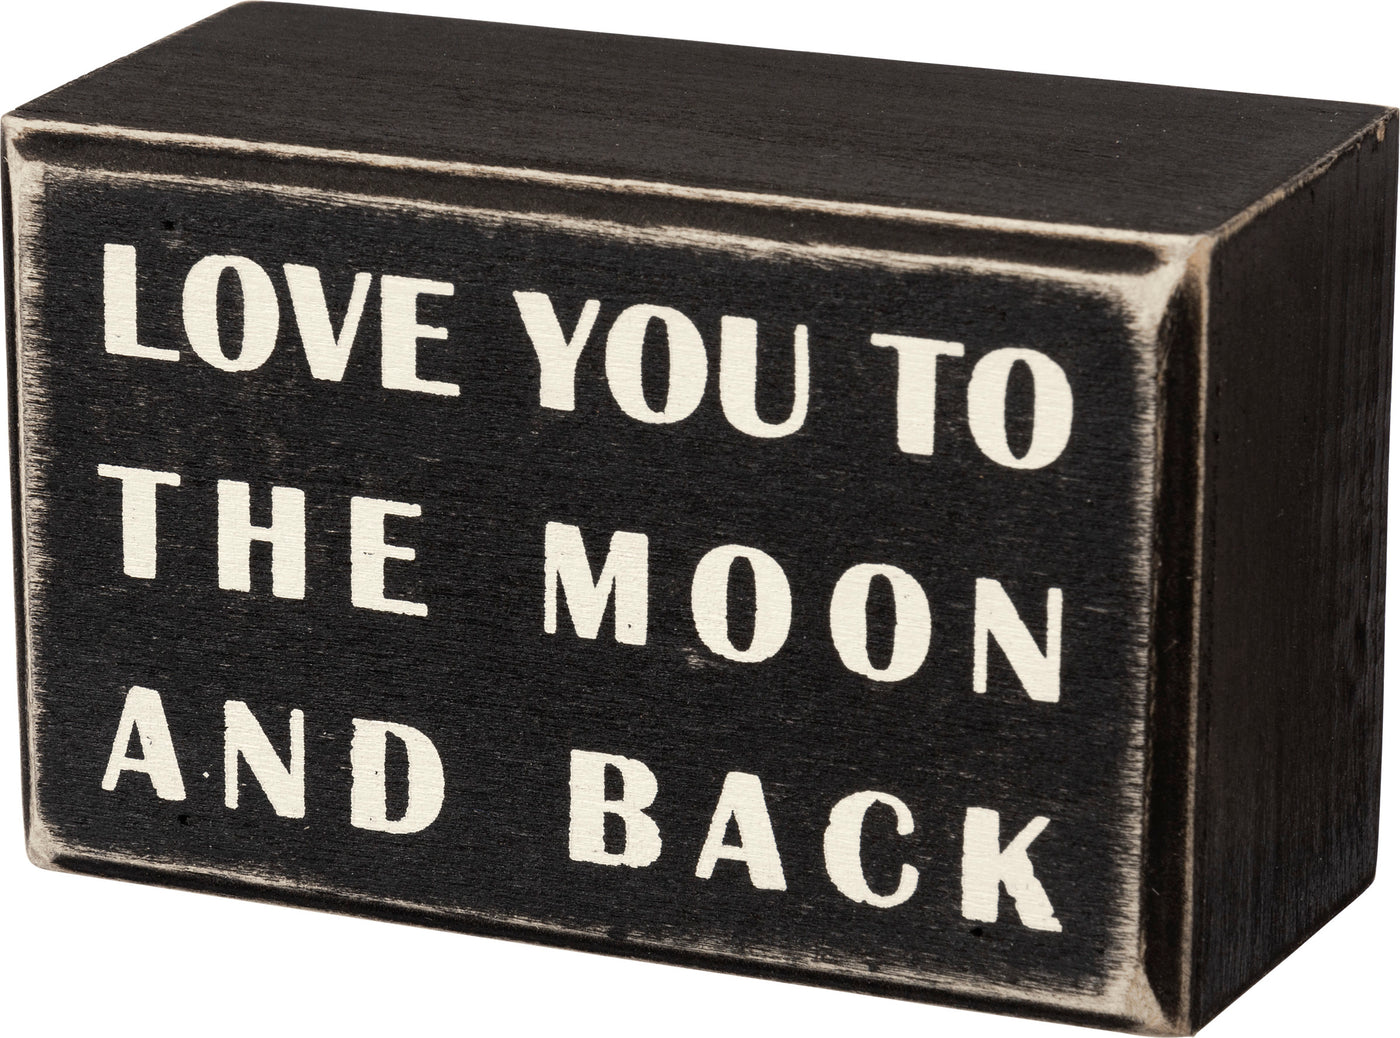 Love You To The Moon And Back Mini Block Sign